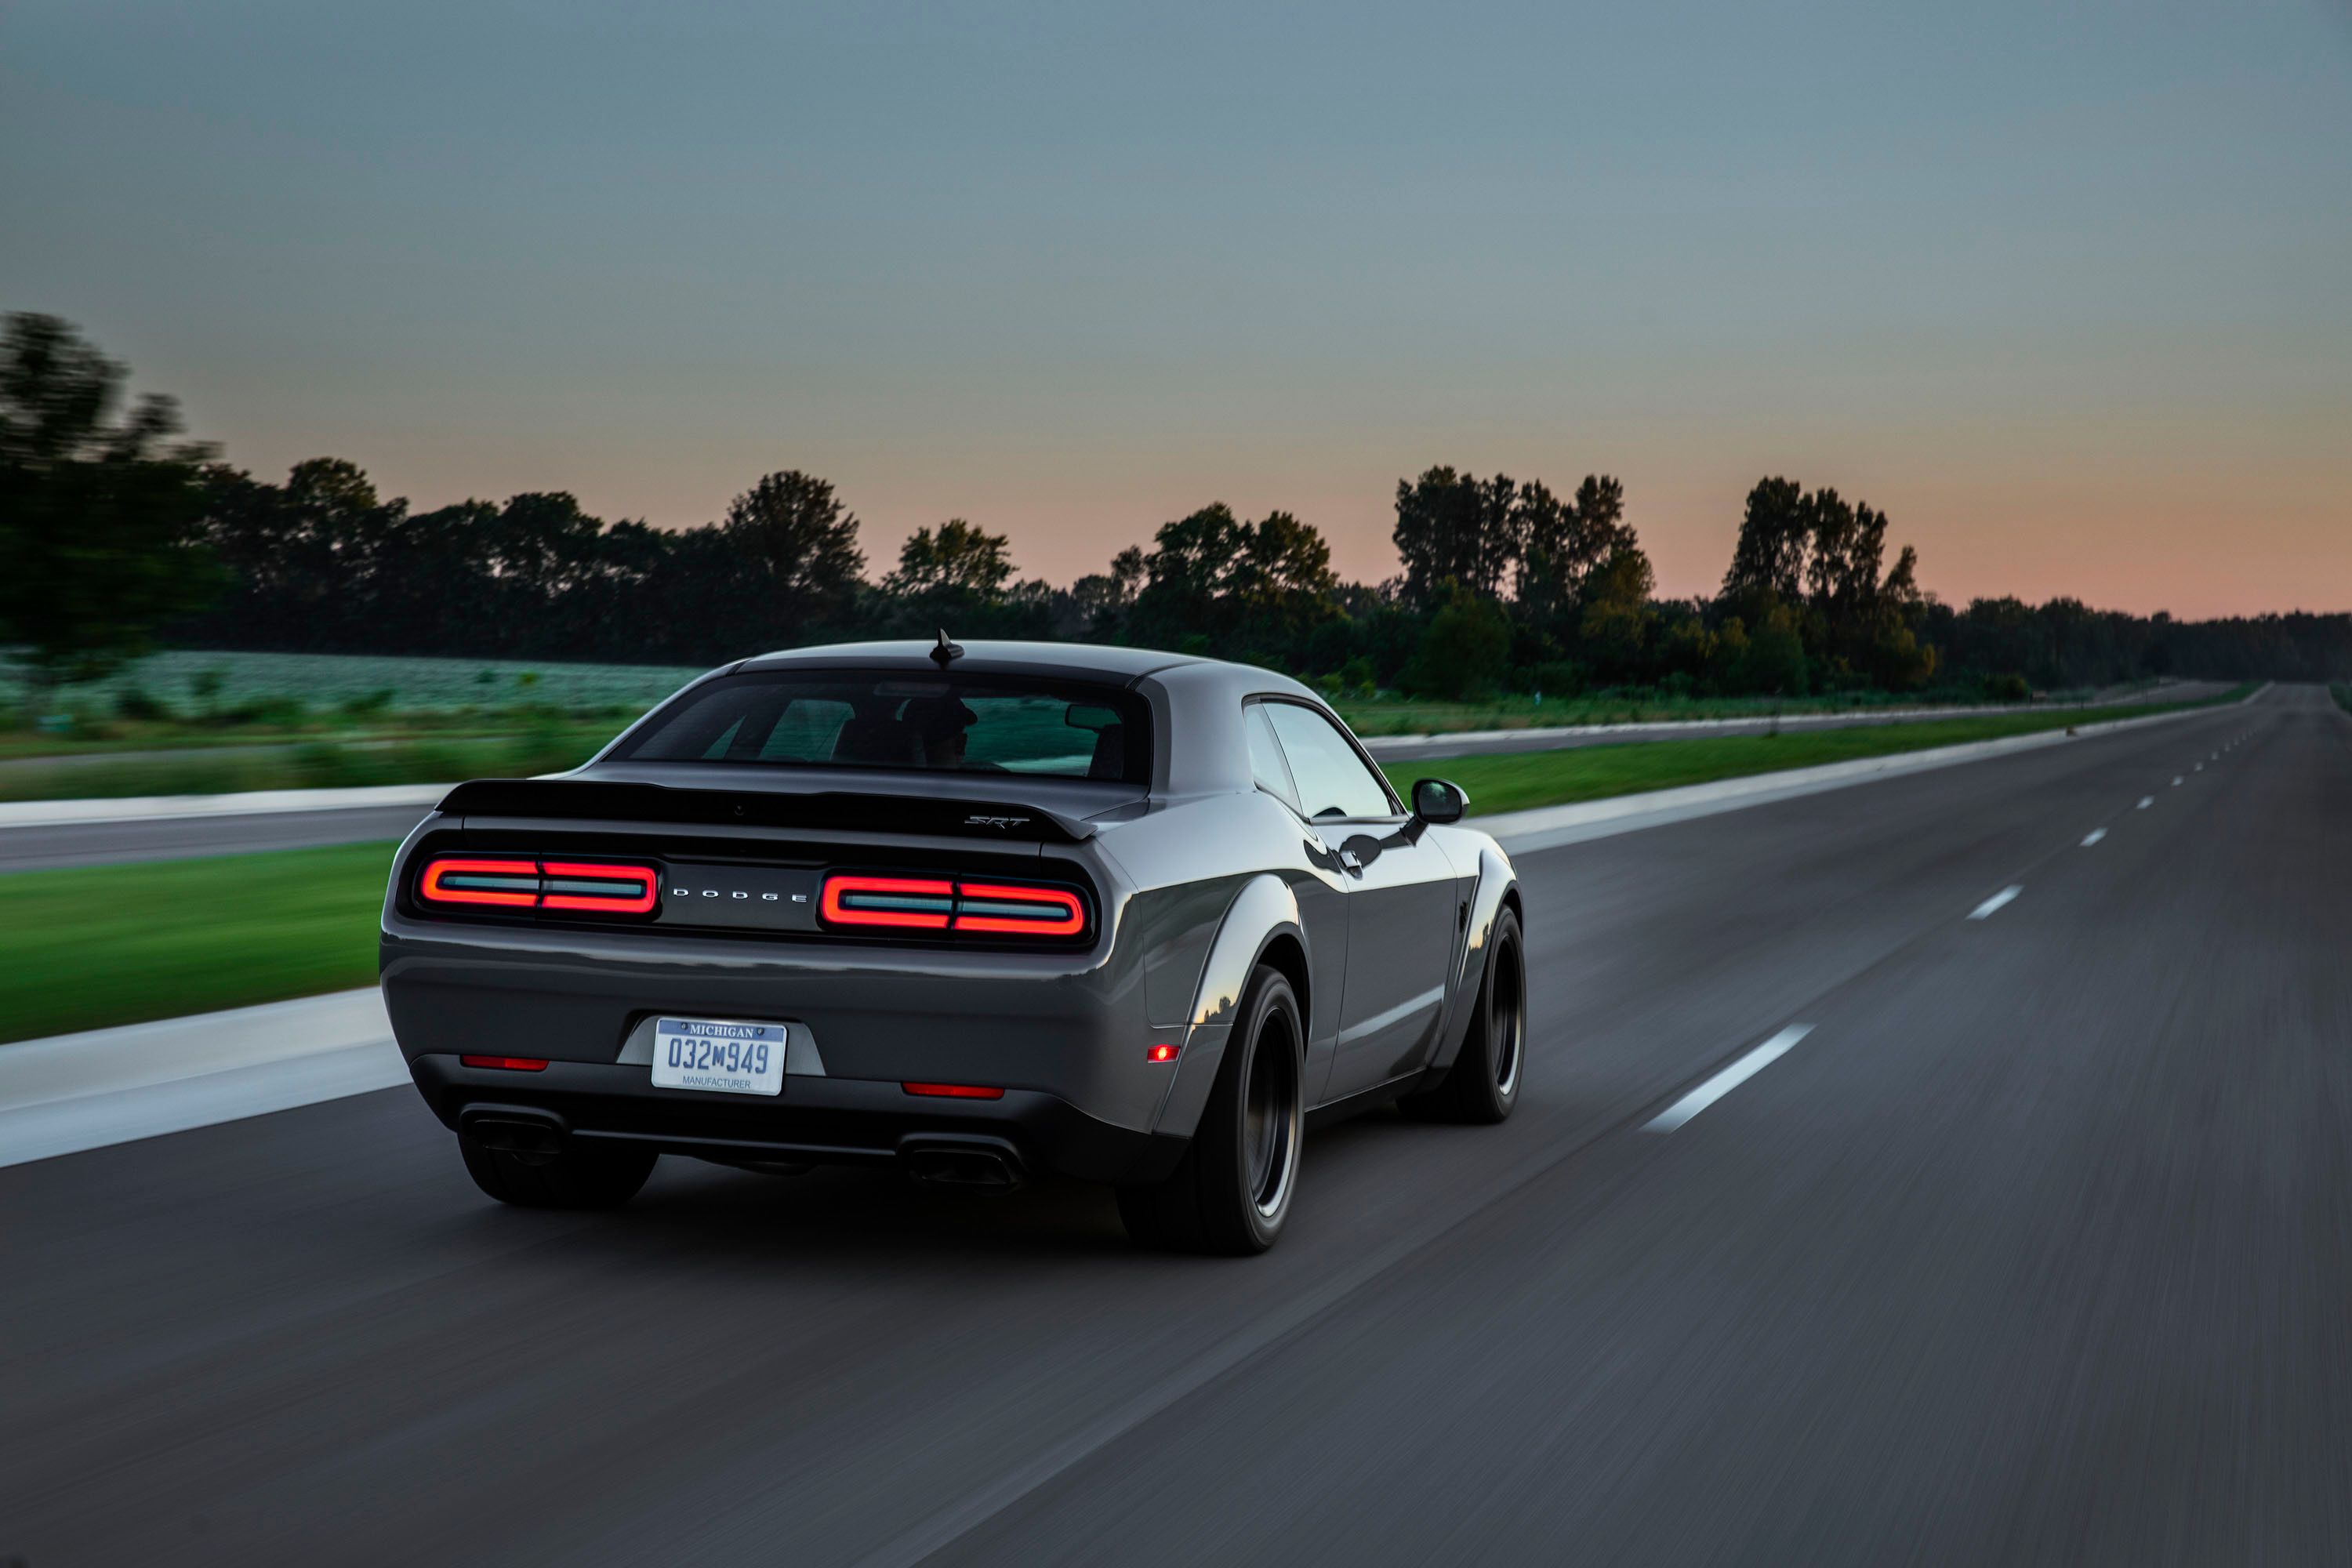 2020 10 Modern Muscle Cars That You Shouldn't Overlook